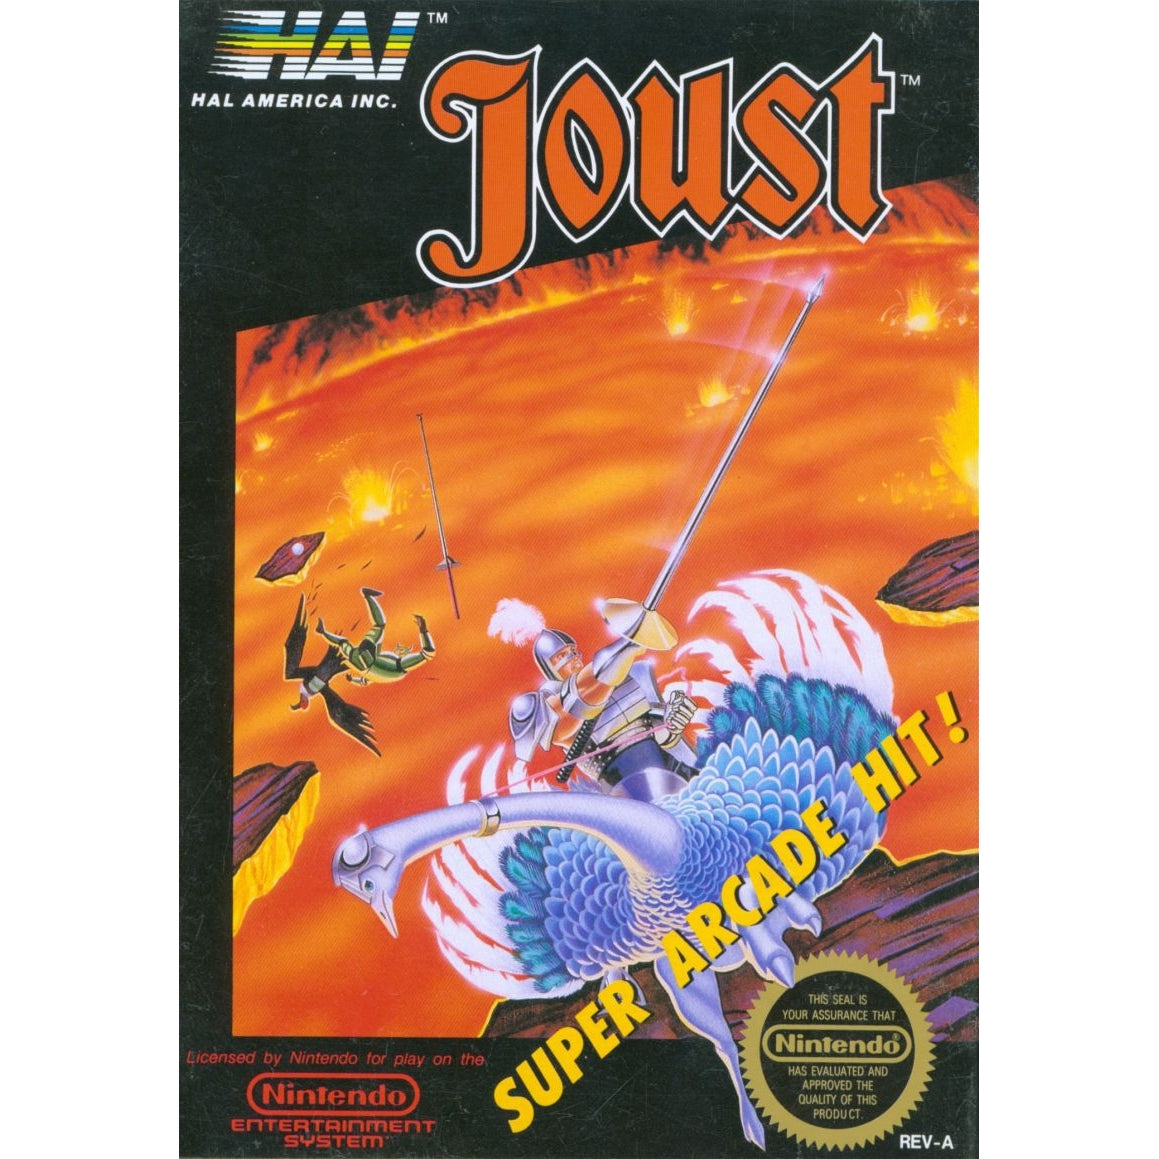 Your Gaming Shop - Joust - Authentic NES Game Cartridge